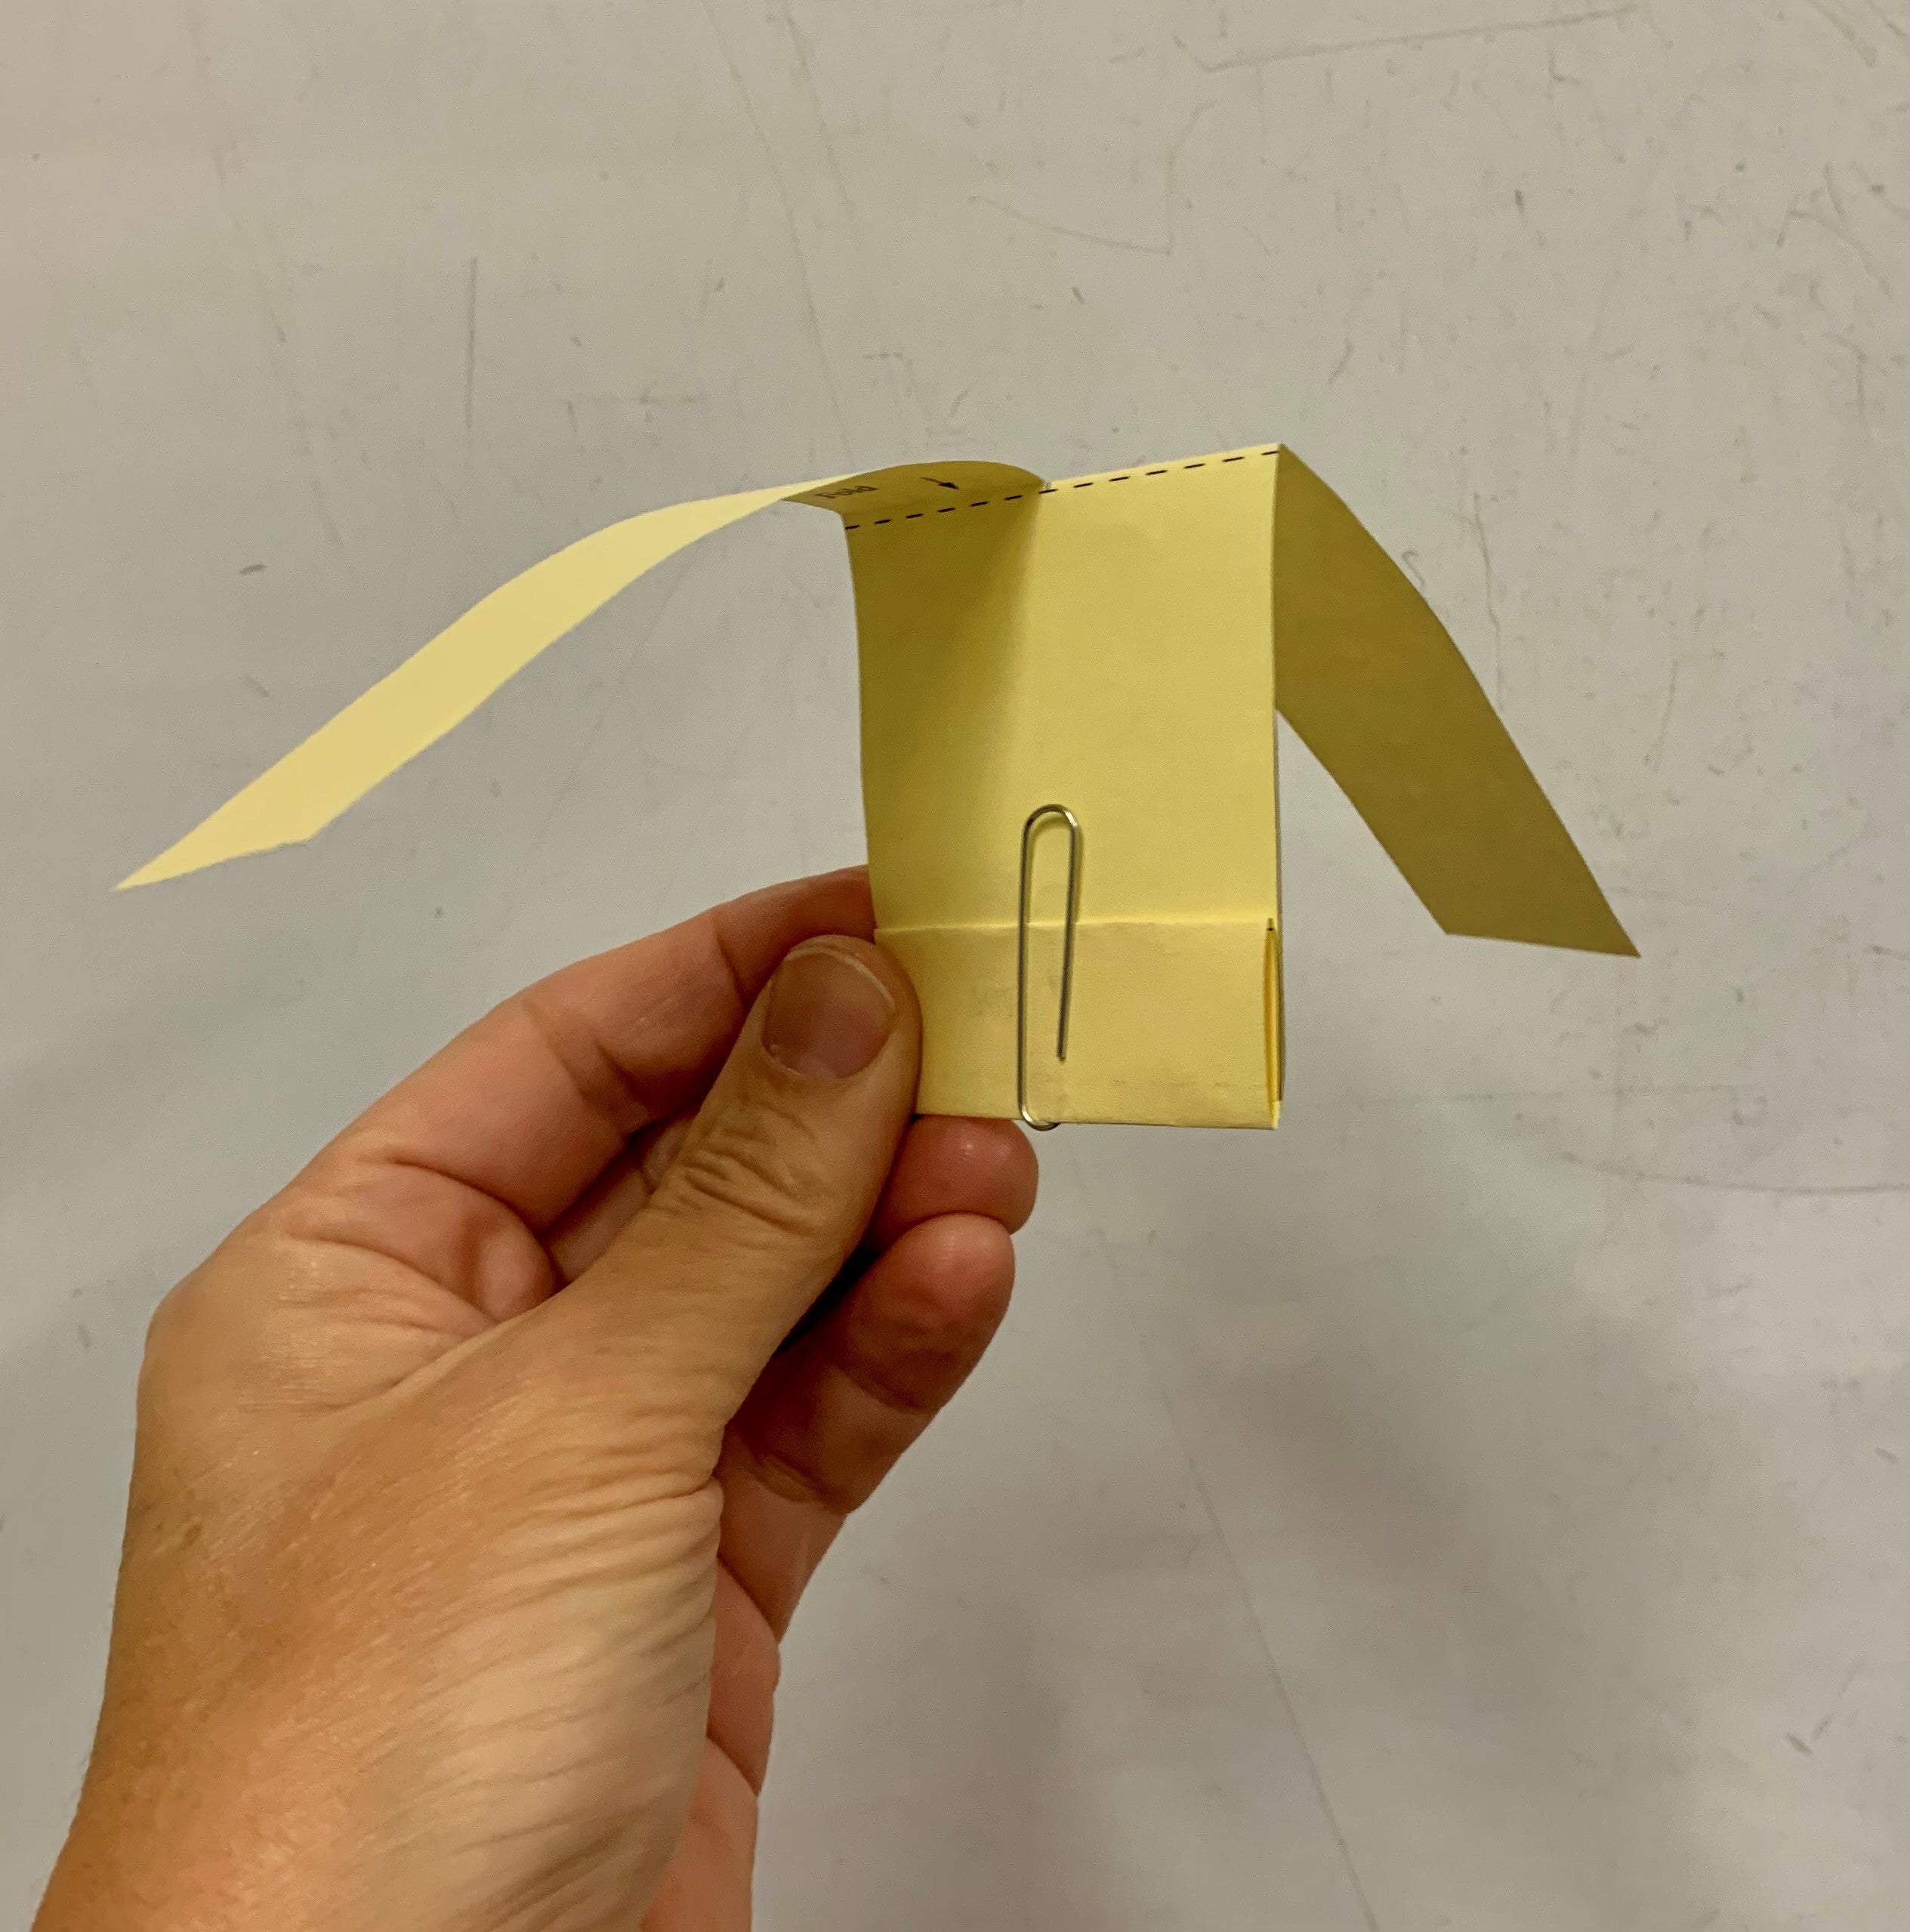 A hand holding a paper helicopter craft.